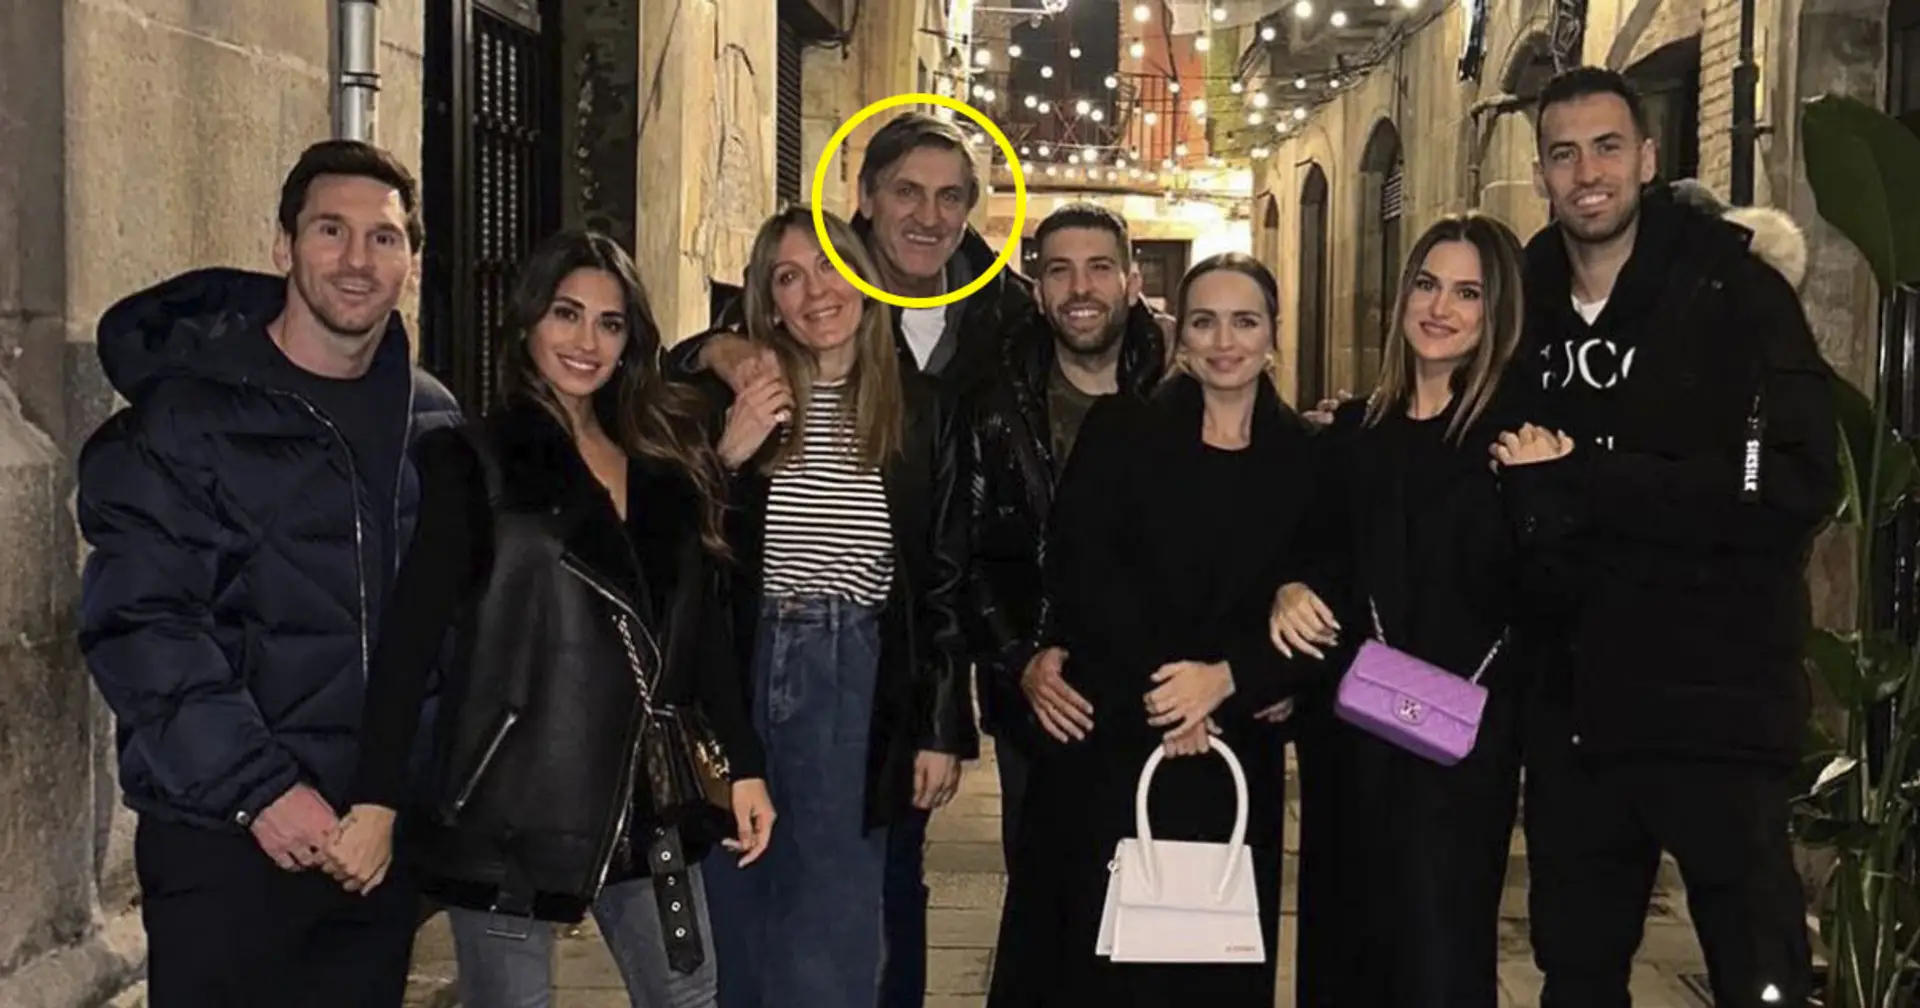 Who is this man in latest Messi photo? Answered